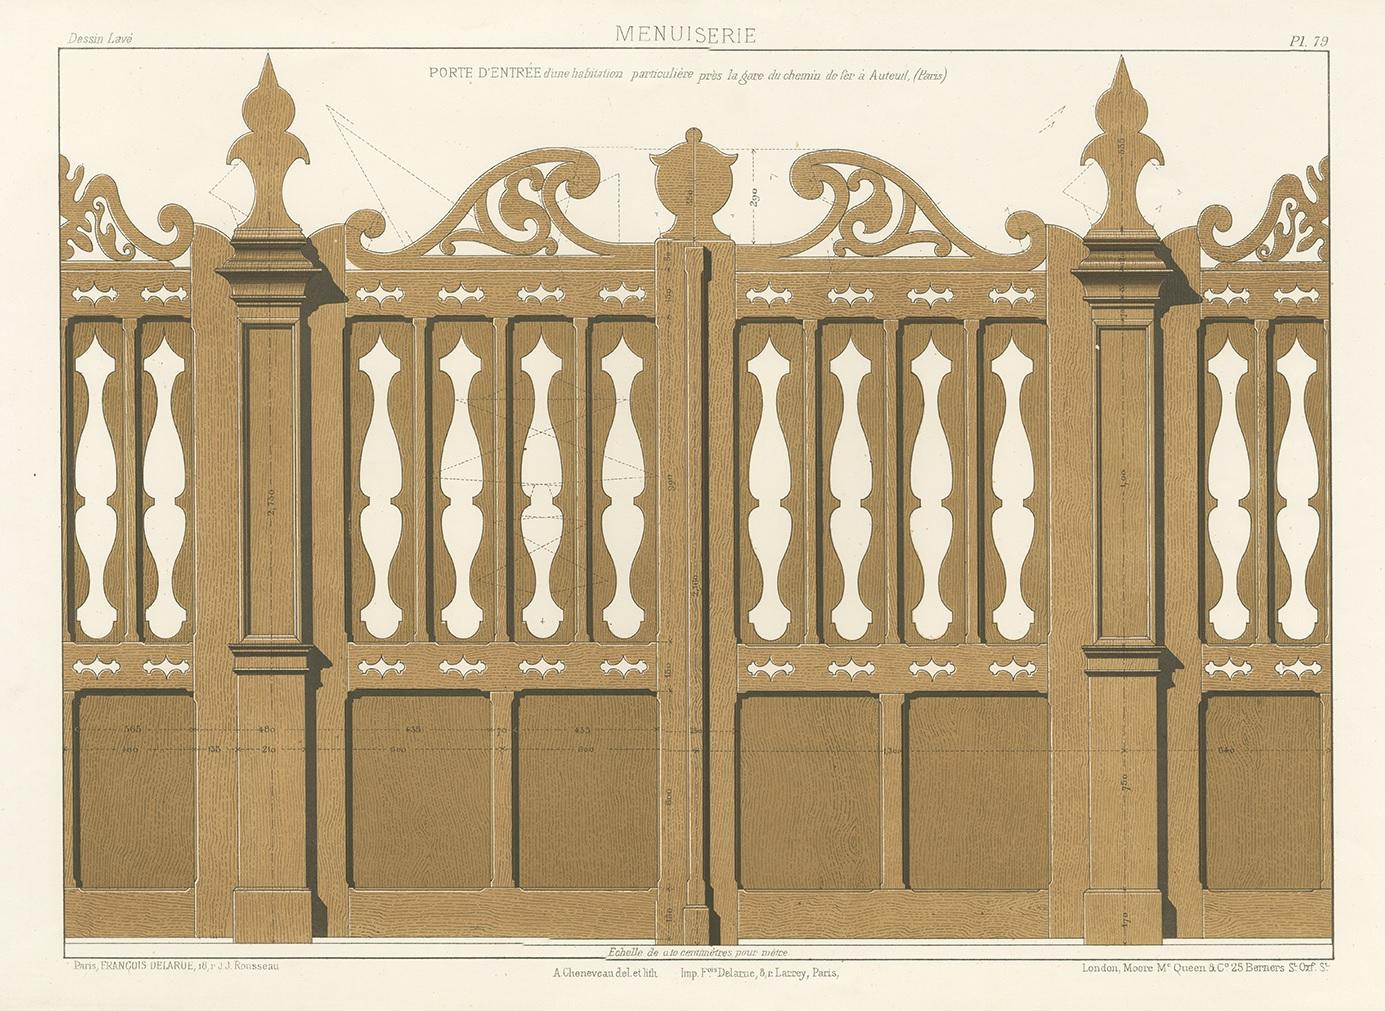 Antique print titled 'Menuiserie'. Lithograph of carpentry/woodwork of an entry door. Published by Francois Delarue.